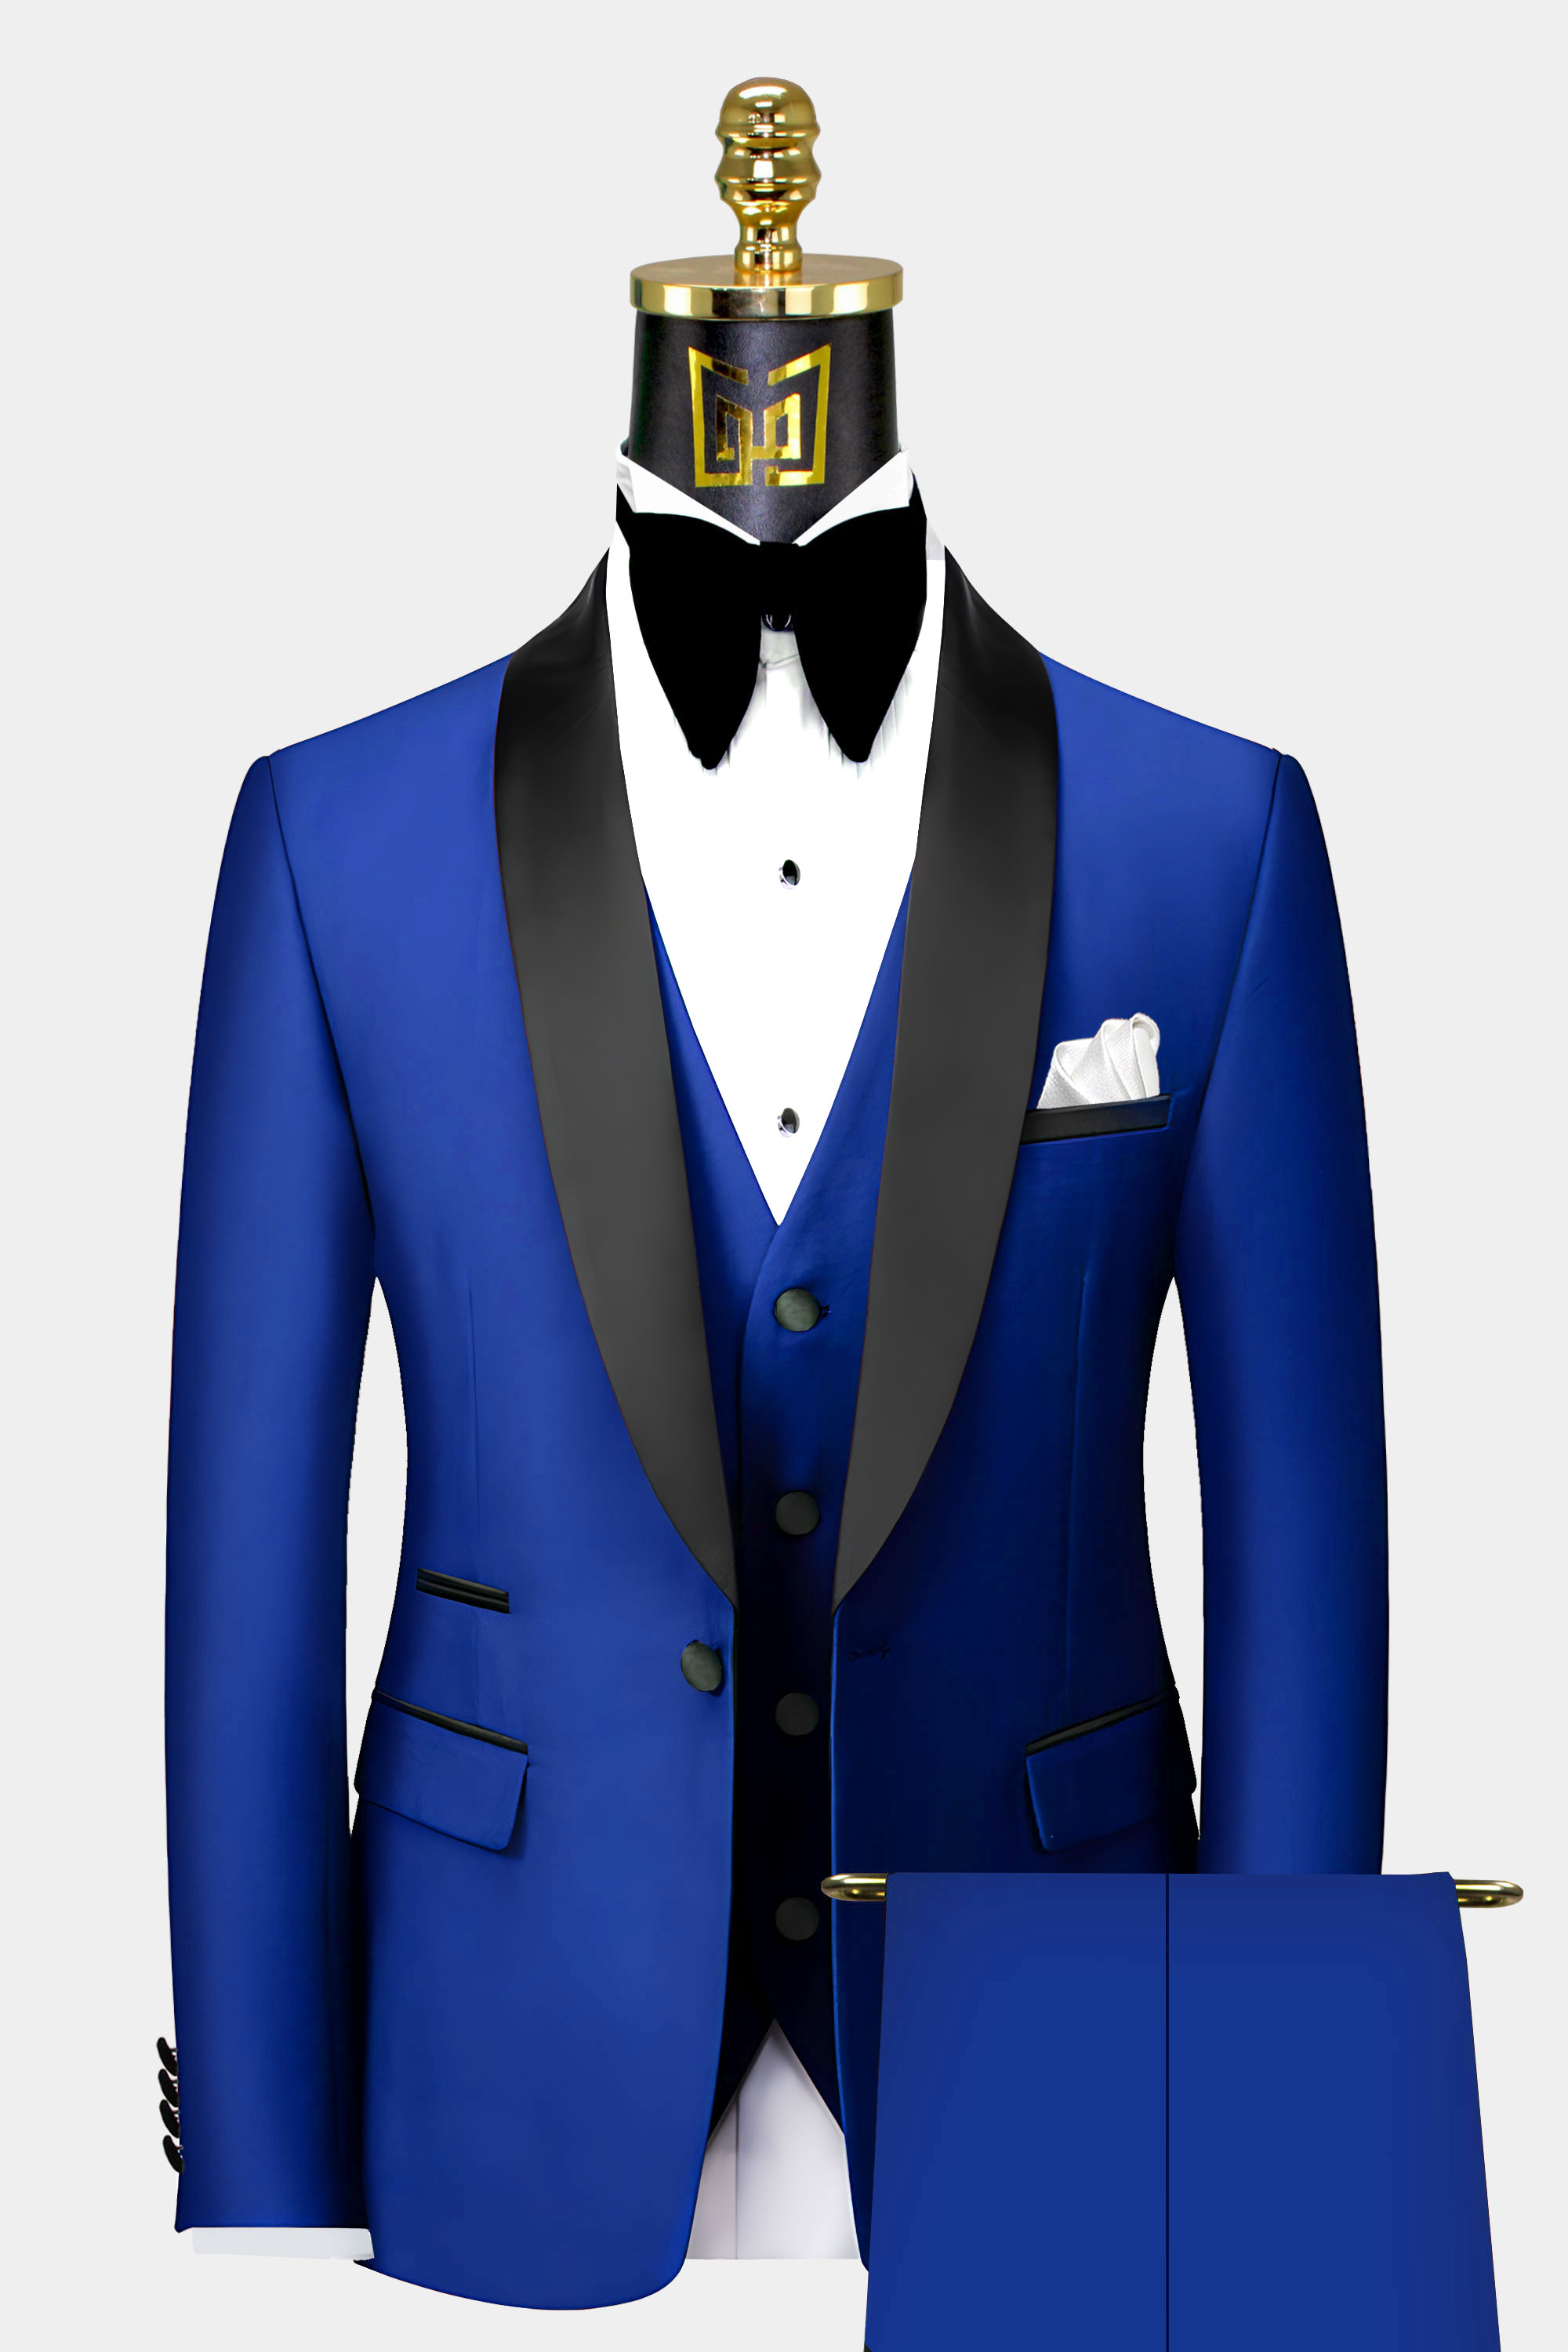 Men's Tuxedo Collection: The Perfect Formal Attire For Any, 51% OFF